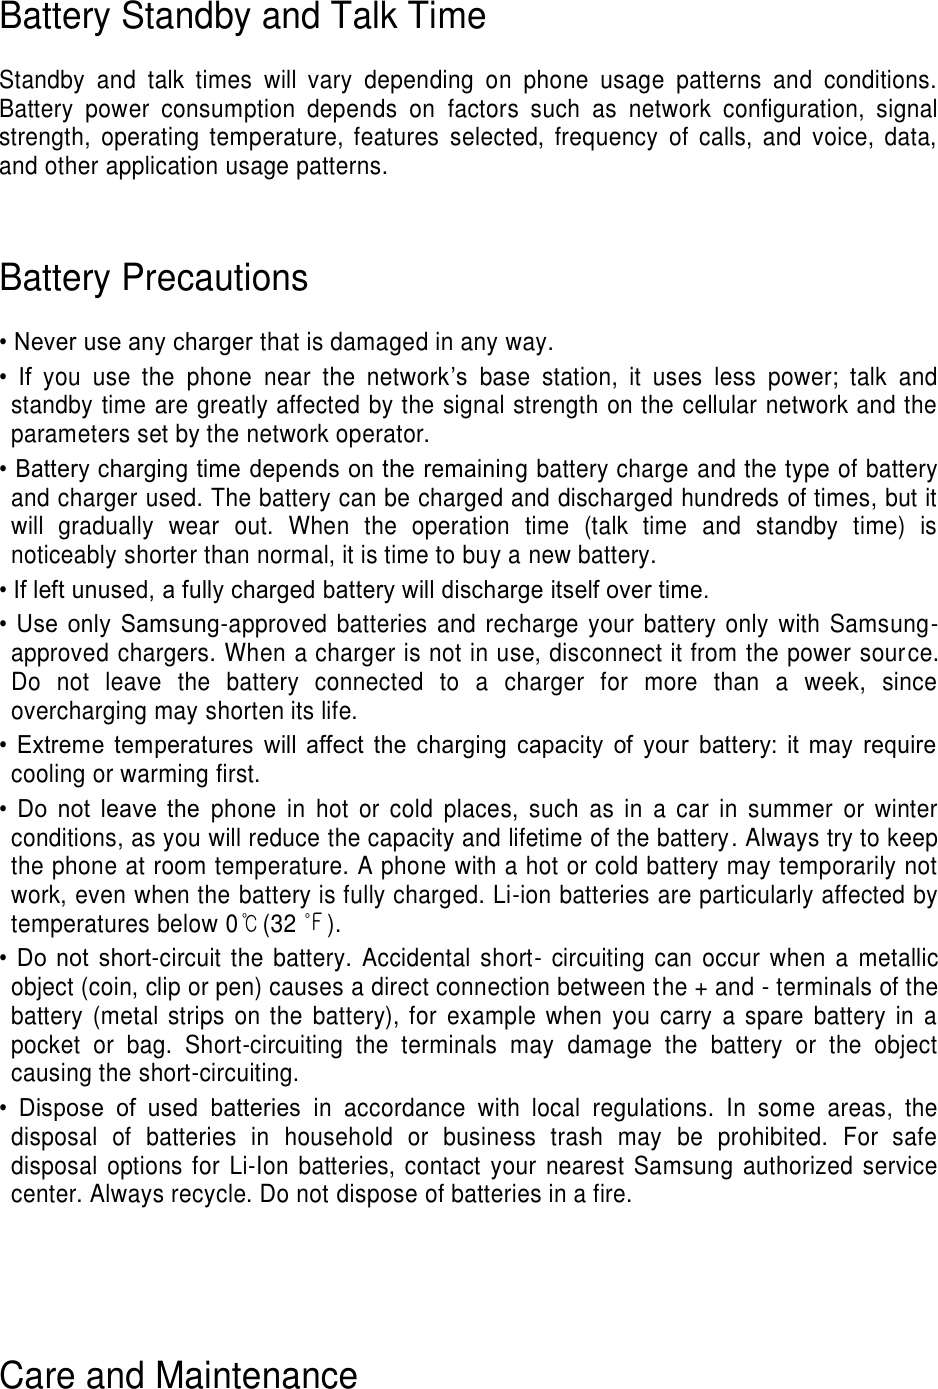 Battery Standby and Talk Time  Standby  and  talk  times  will  vary  depending  on  phone  usage  patterns  and  conditions. Battery  power  consumption  depends  on  factors  such  as  network  configuration,  signal strength,  operating  temperature,  features  selected,  frequency  of  calls,  and  voice,  data, and other application usage patterns.     Battery Precautions  • Never use any charger that is damaged in any way. •  If  you  use  the  phone  near  the  network’s  base  station,  it  uses  less  power;  talk  and standby time are greatly affected by the signal strength on the cellular network and the parameters set by the network operator. • Battery charging time depends on the remaining battery charge and the type of battery and charger used. The battery can be charged and discharged hundreds of times, but it will  gradually  wear  out.  When  the  operation  time  (talk  time  and  standby  time)  is noticeably shorter than normal, it is time to buy a new battery. • If left unused, a fully charged battery will discharge itself over time. •  Use  only  Samsung-approved batteries and recharge your battery  only with Samsung-approved chargers. When a charger is not in use, disconnect it from the power source. Do  not  leave  the  battery  connected  to  a  charger  for  more  than  a  week,  since overcharging may shorten its life. •  Extreme  temperatures  will  affect  the  charging  capacity  of  your  battery:  it  may  require cooling or warming first. •  Do  not  leave  the  phone  in  hot  or  cold  places,  such  as  in  a  car  in  summer  or  winter conditions, as you will reduce the capacity and lifetime of the battery. Always try to keep the phone at room temperature. A phone with a hot or cold battery may temporarily not work, even when the battery is fully charged. Li-ion batteries are particularly affected by temperatures below 0℃(32 ℉). •  Do  not  short-circuit  the  battery.  Accidental  short-  circuiting  can  occur  when  a  metallic object (coin, clip or pen) causes a direct connection between the + and - terminals of the battery  (metal strips  on the  battery), for  example  when  you  carry  a  spare  battery in  a pocket  or  bag.  Short-circuiting  the  terminals  may  damage  the  battery  or  the  object causing the short-circuiting. •  Dispose  of  used  batteries  in  accordance  with  local  regulations.  In  some  areas,  the disposal  of  batteries  in  household  or  business  trash  may  be  prohibited.  For  safe disposal options for Li-Ion batteries, contact your nearest Samsung authorized  service center. Always recycle. Do not dispose of batteries in a fire.     Care and Maintenance 